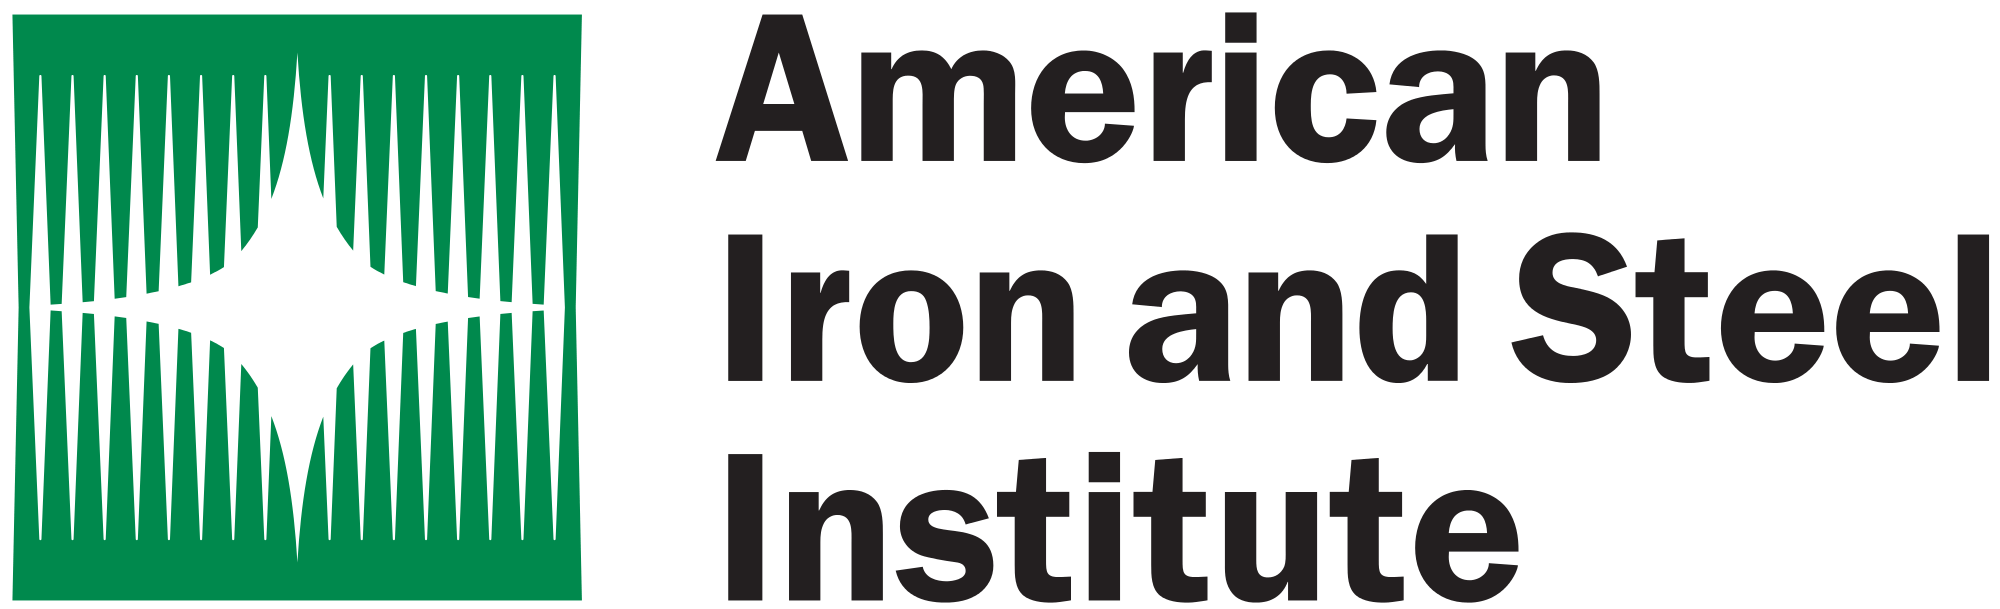 American Iron Logo - File:American-Iron-and-Steel-Institute-Logo.svg - Wikimedia Commons